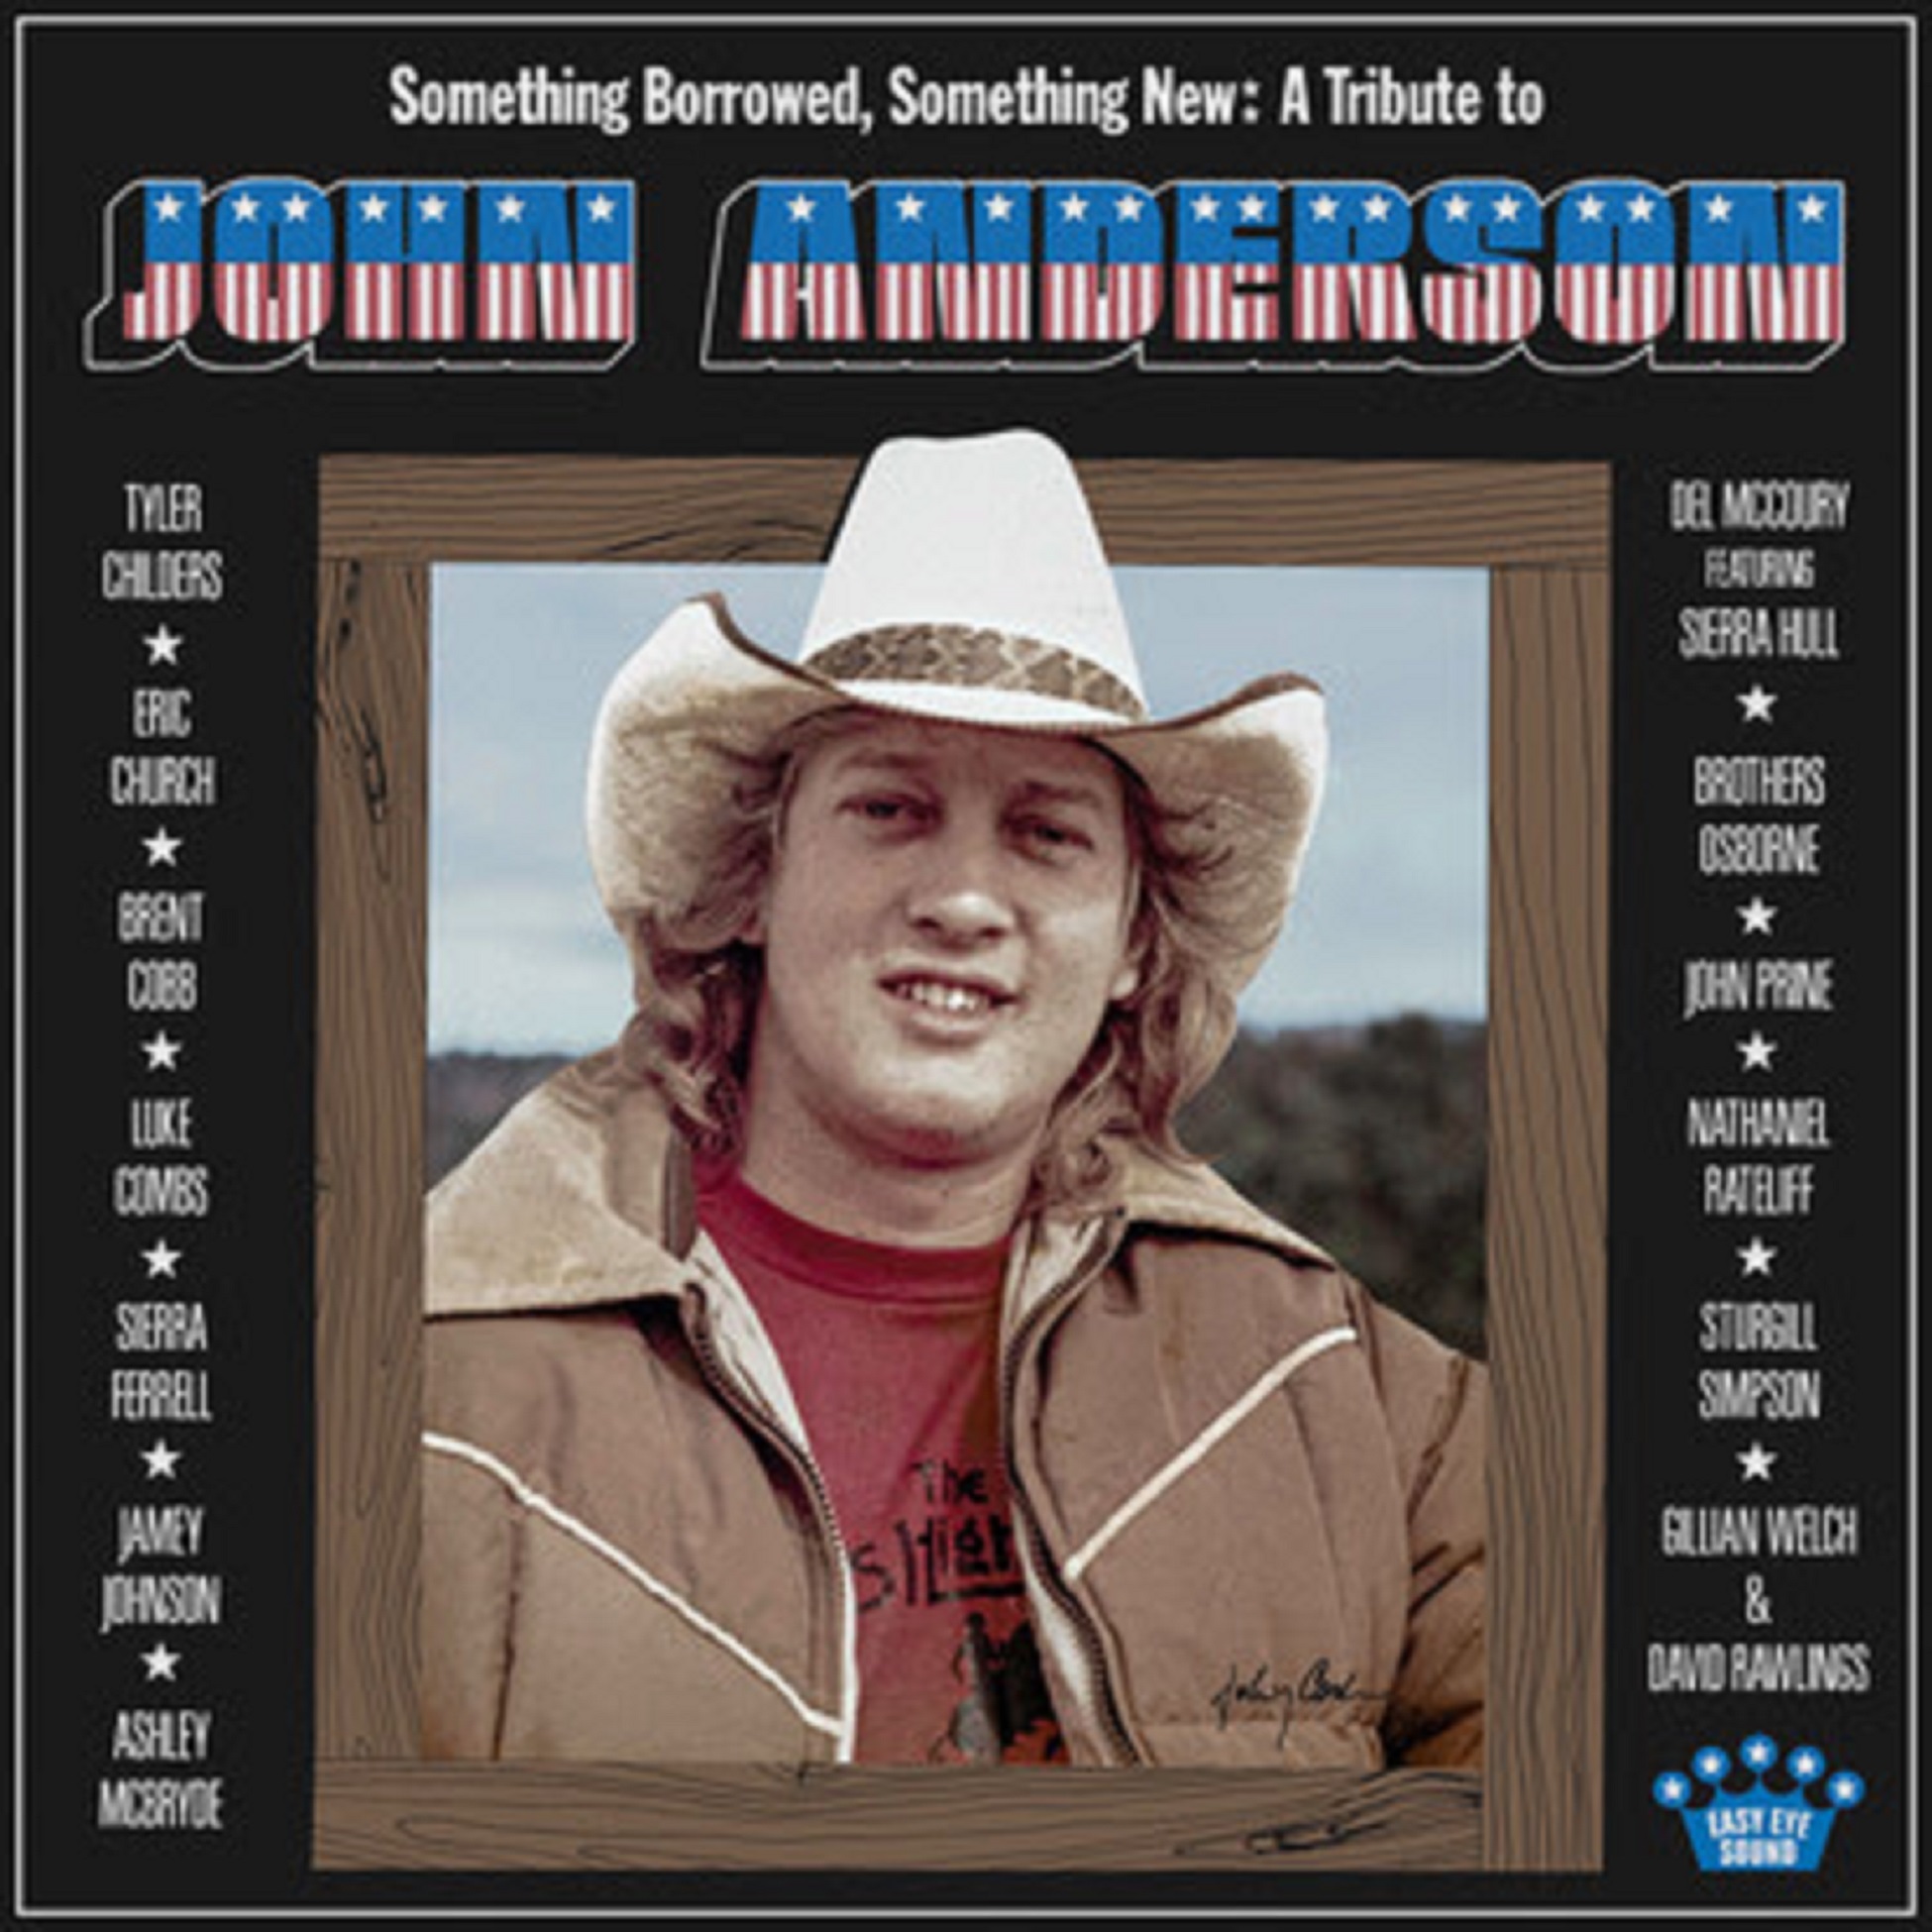 "Something Borrowed, Something New: A Tribute to John Anderson" out August 5